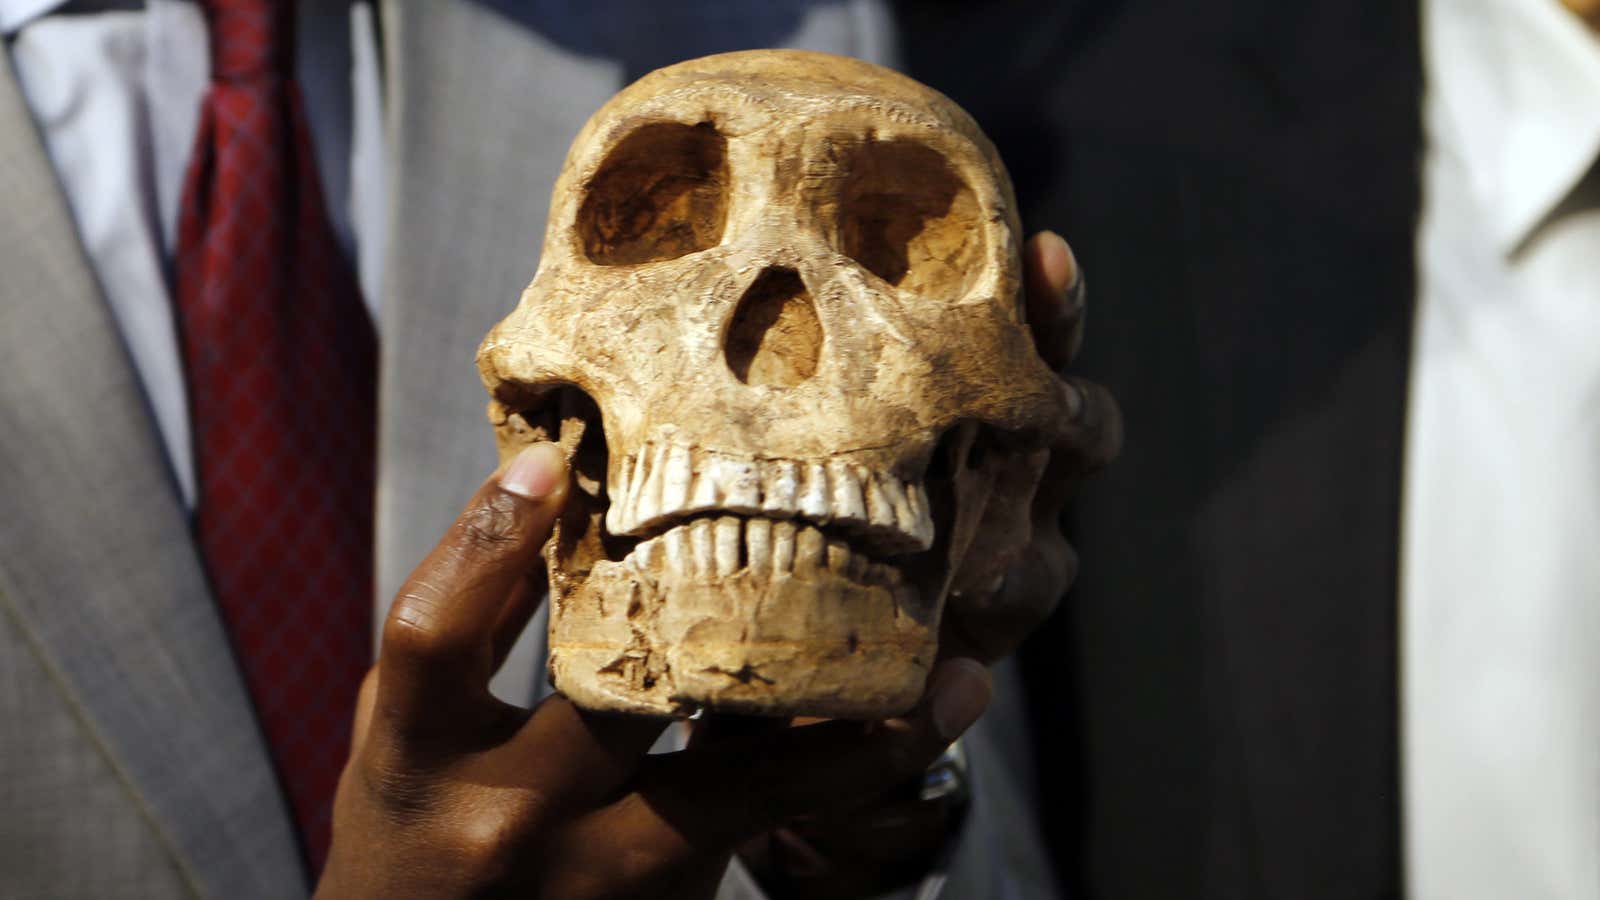 A replica skull of a species belonging to the human family tree whose remnants were first discovered in a South African cave in 2013 is held at the unveiling at the Maropeng Museum, near Magaliesburg, South Africa.